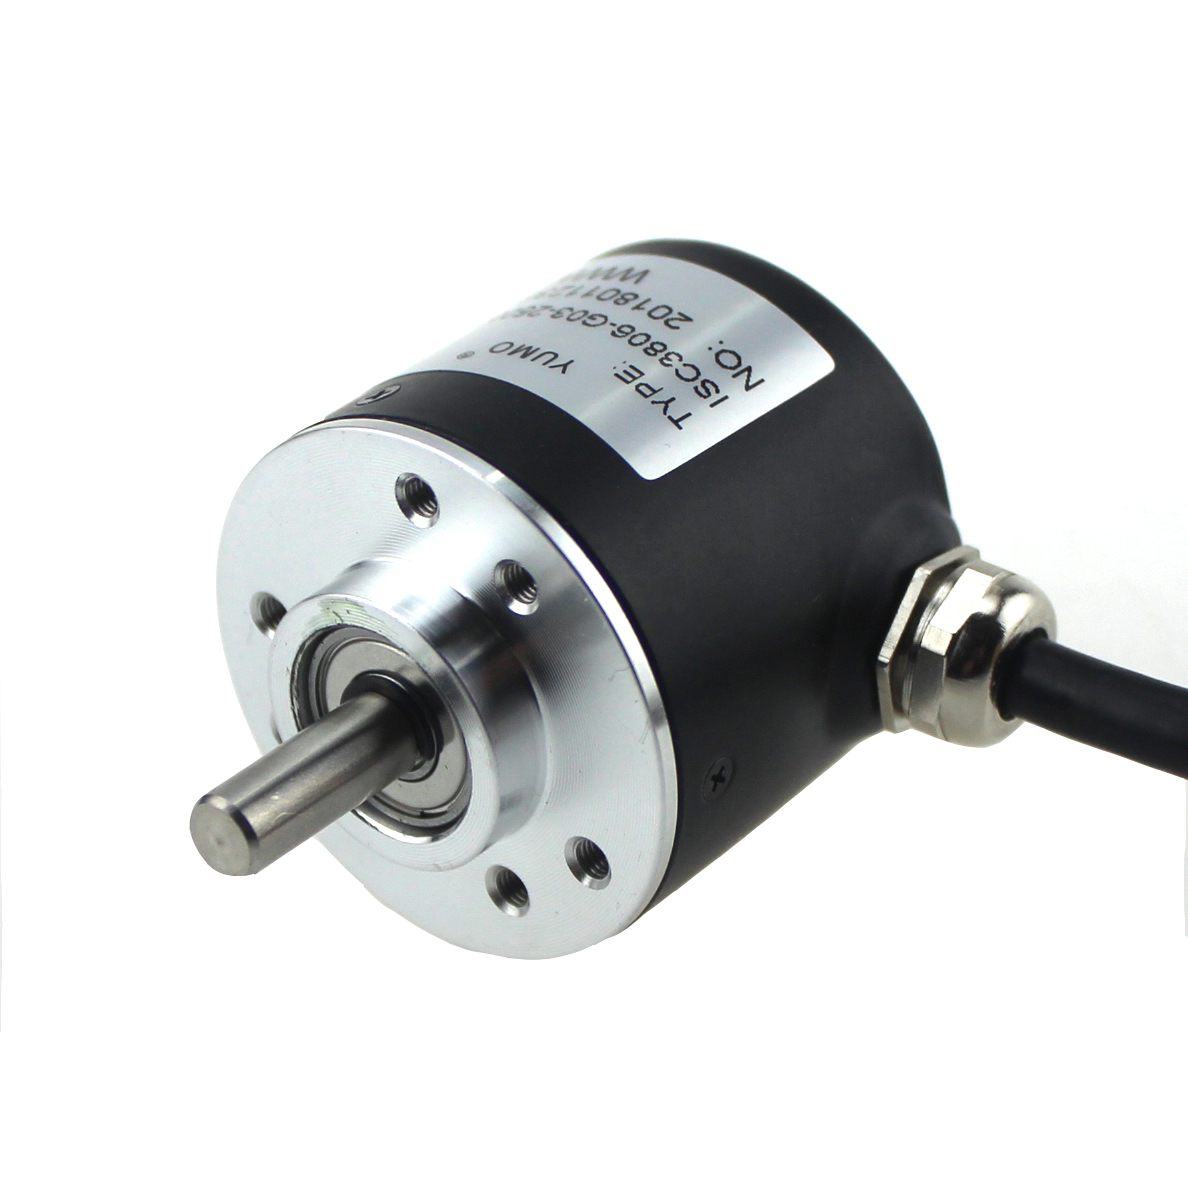 1000PPR, Push-pull with 5-26V Mini Size 38mm Diameter Shell Solid Shaft Rotary Encoder with Different Resolutions 